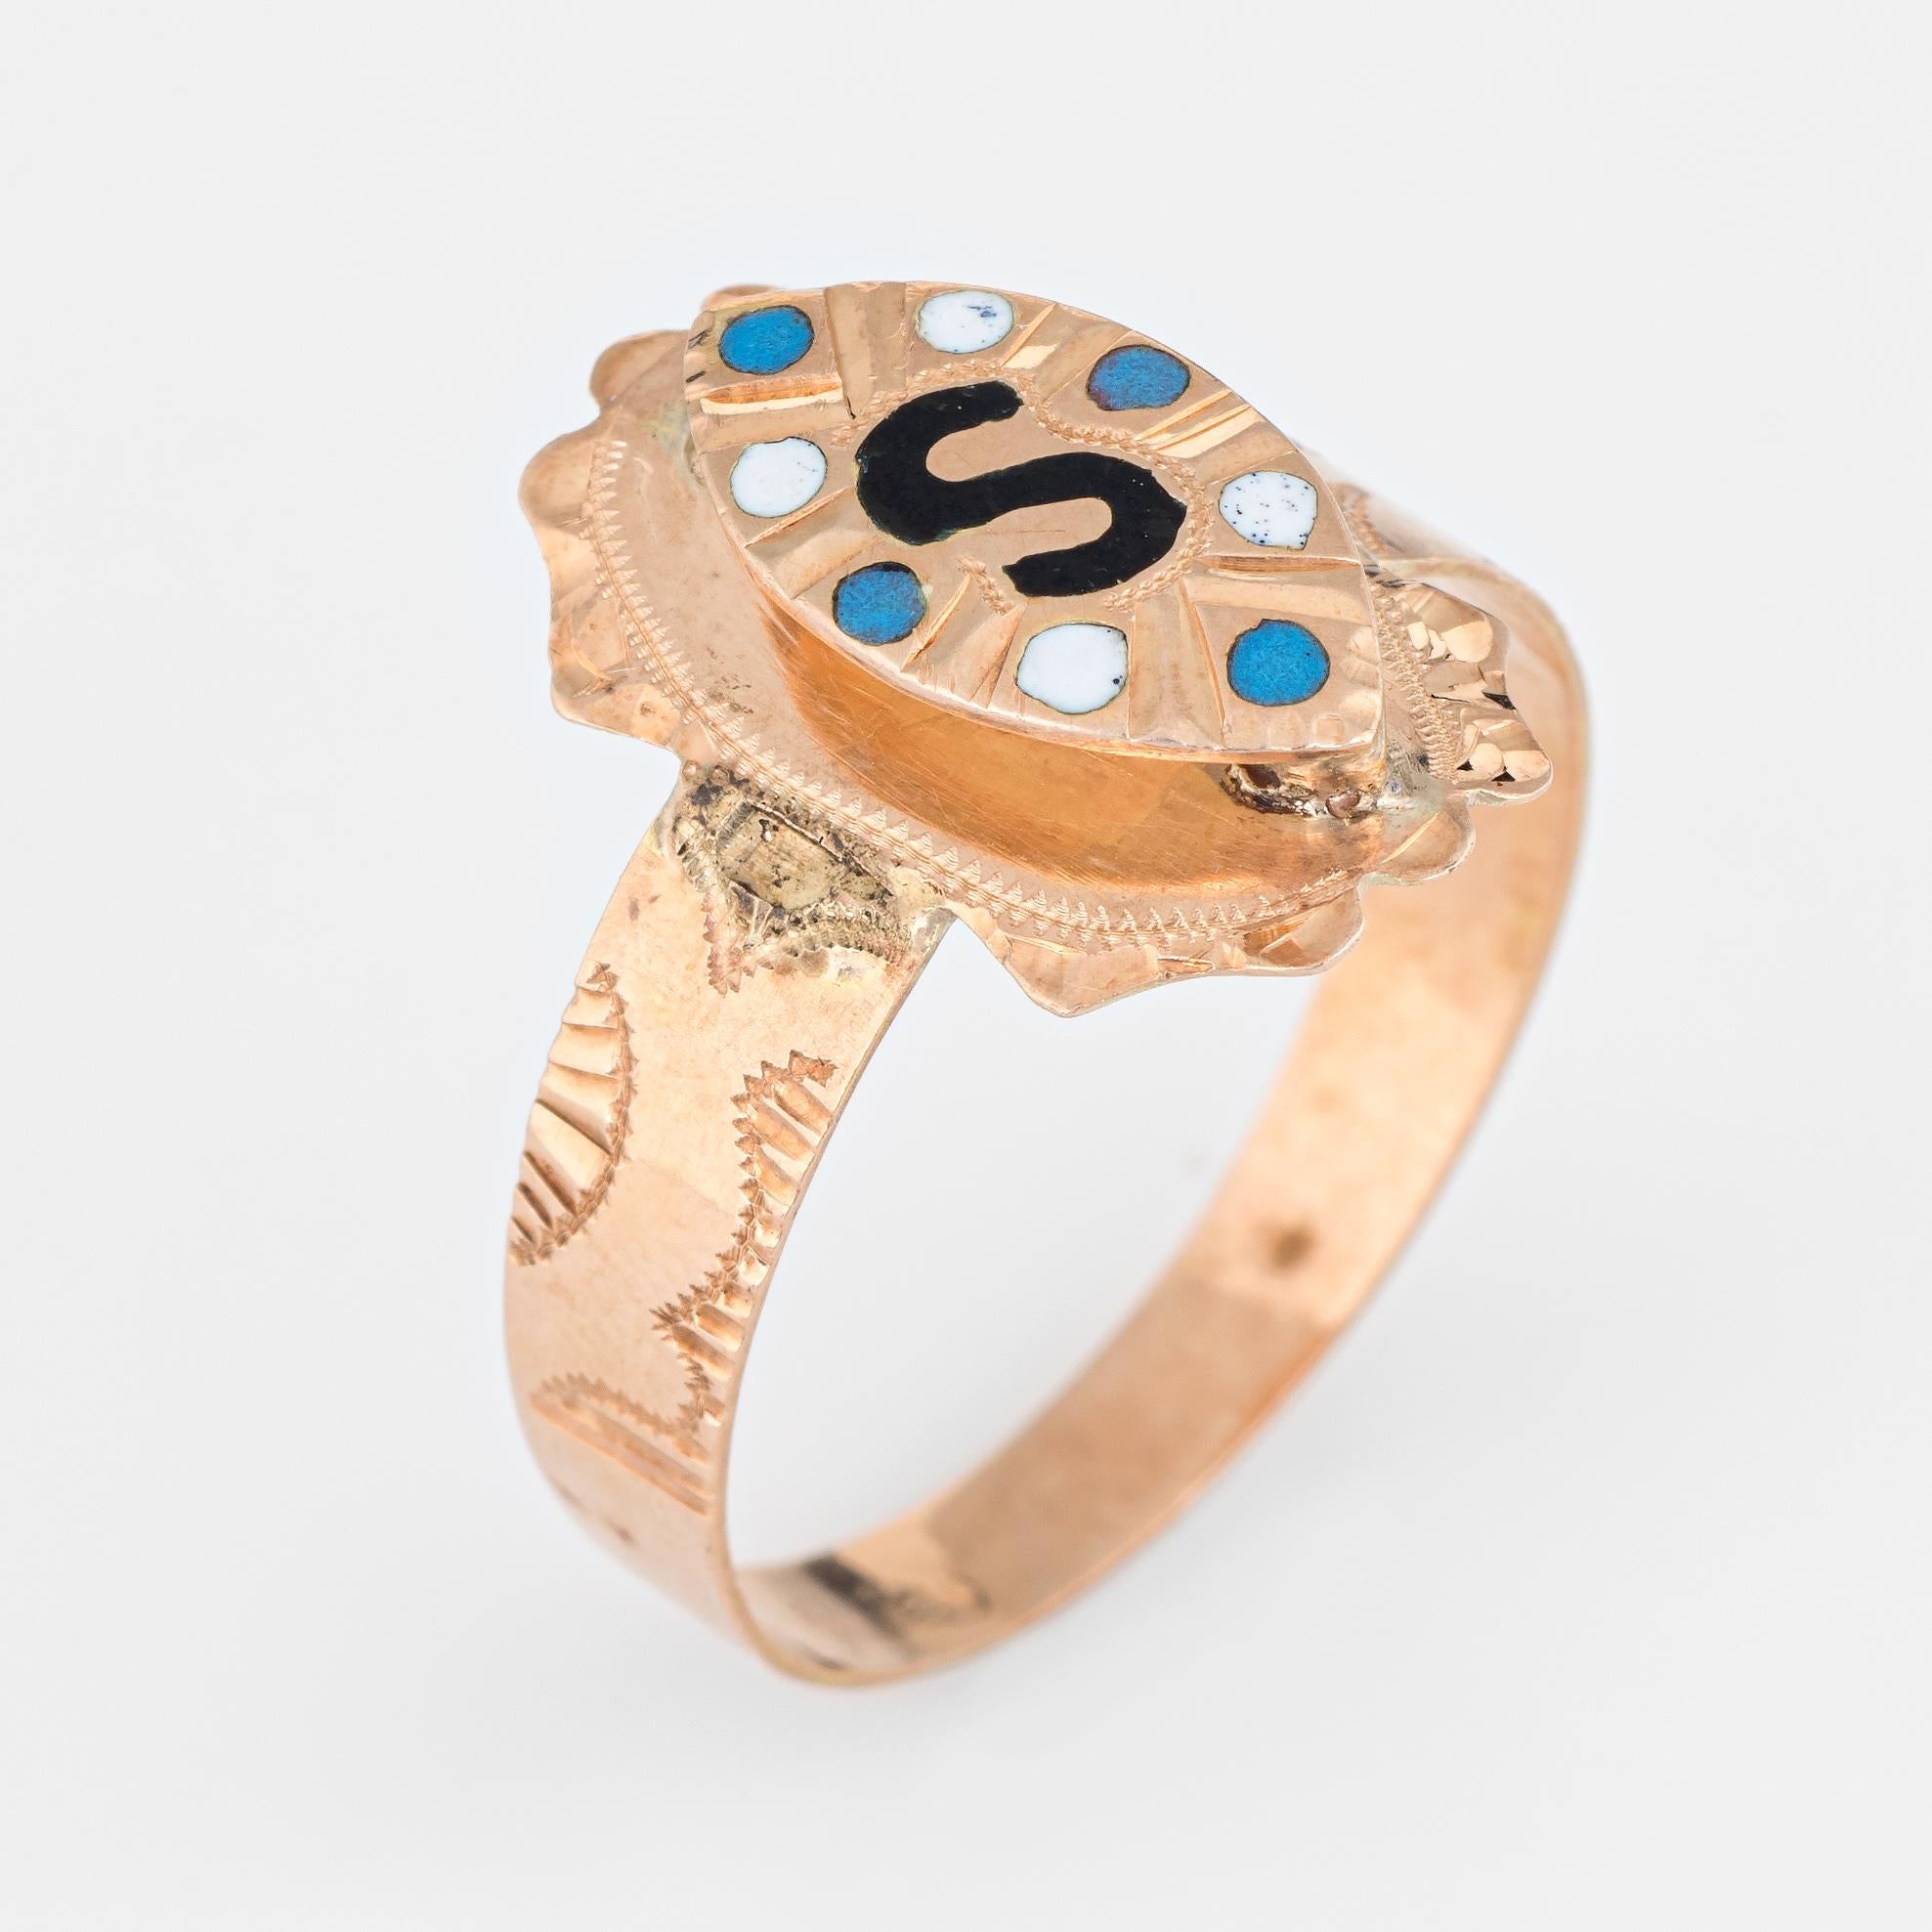 Antique Victorian era ring (circa 1880s to 1900s), crafted in 10 karat rose gold.

The letter 